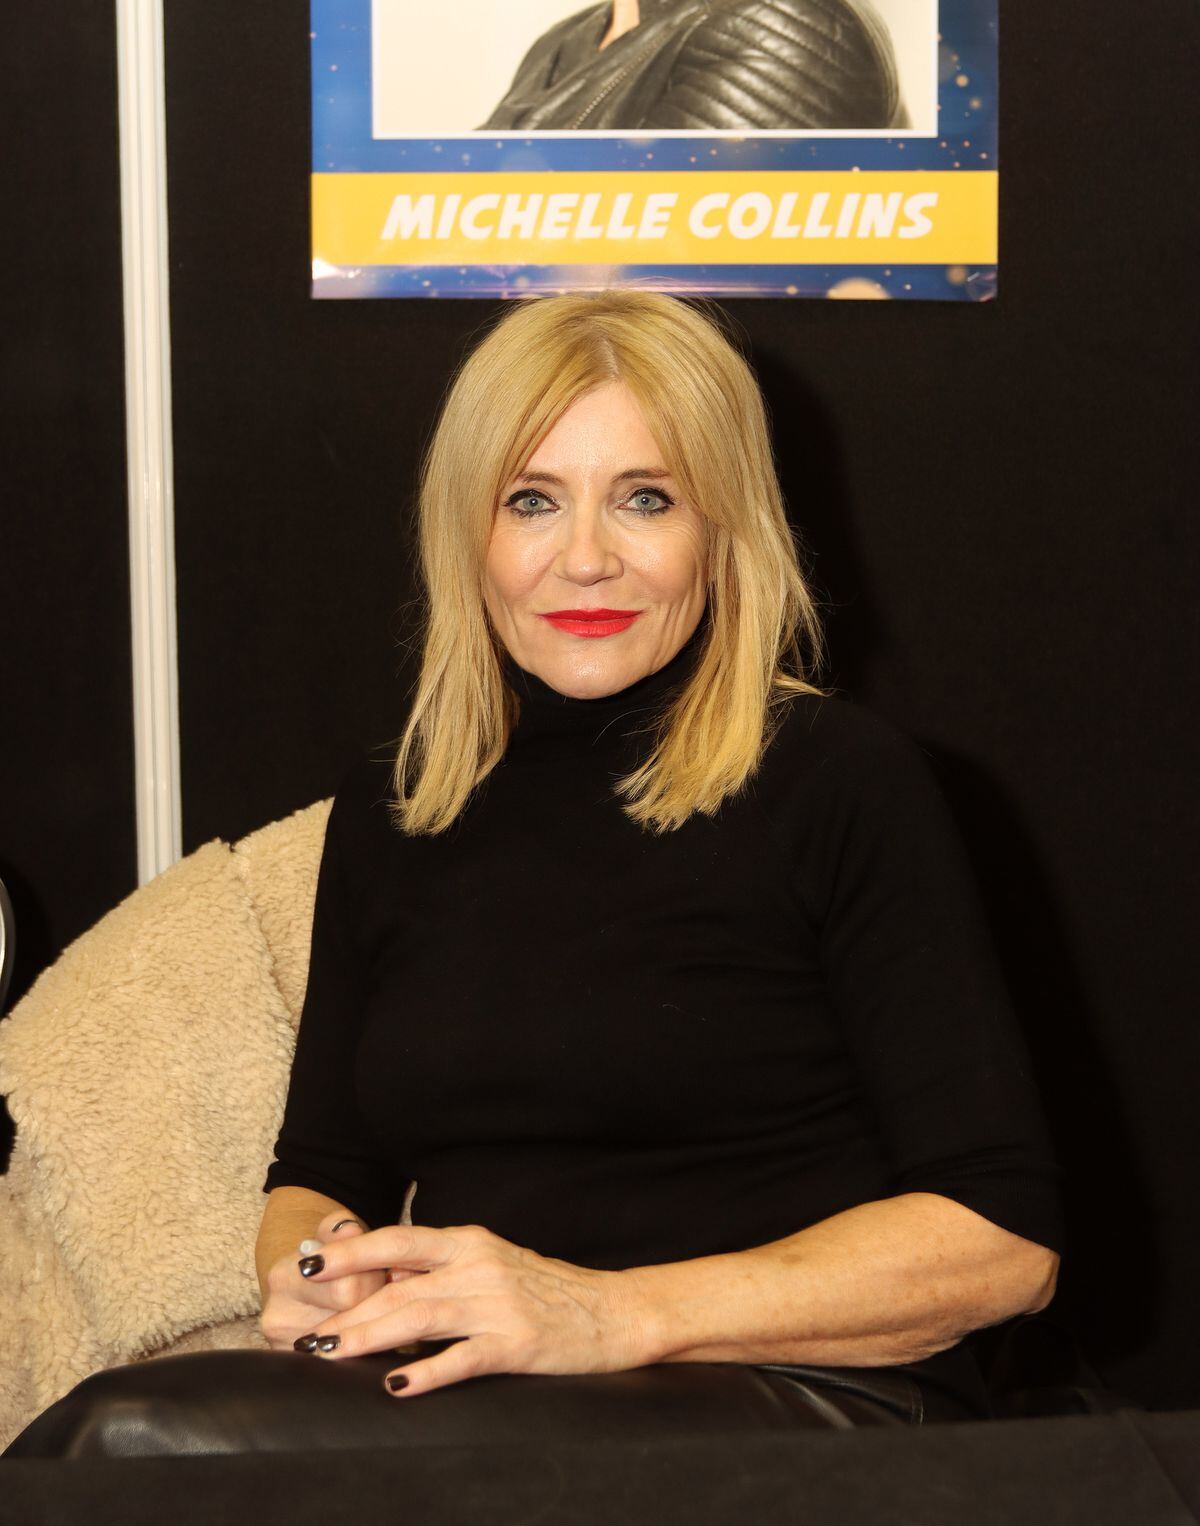 Soap star Michelle Collins was at the event